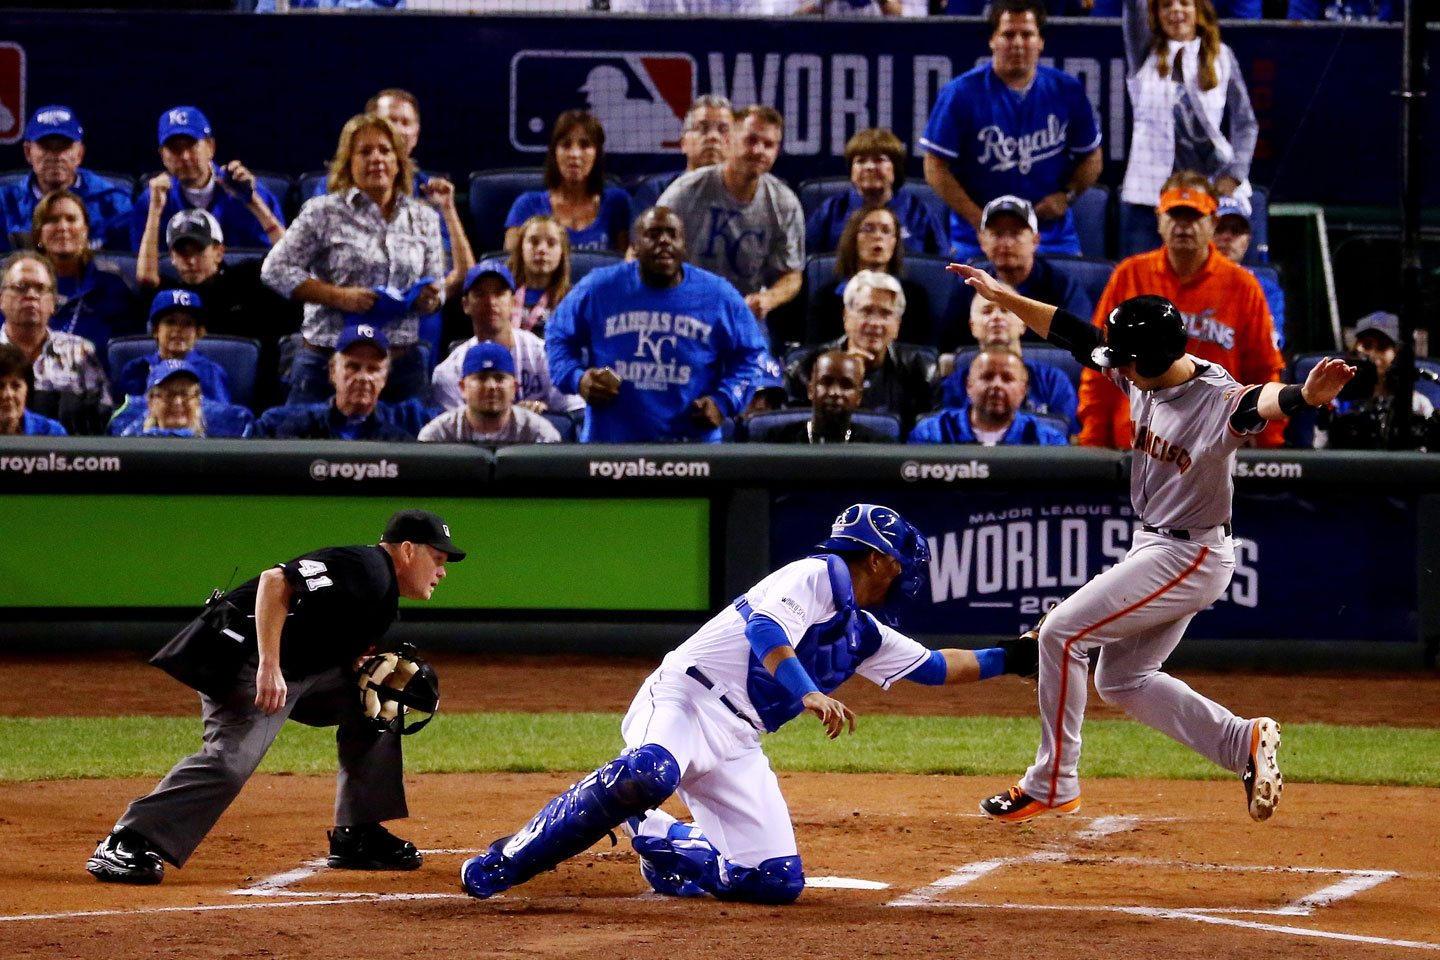 Buster Posey also tried to score on Sandoval's double in the top of the first, but was out by a mile. (Elsa/Getty Images)